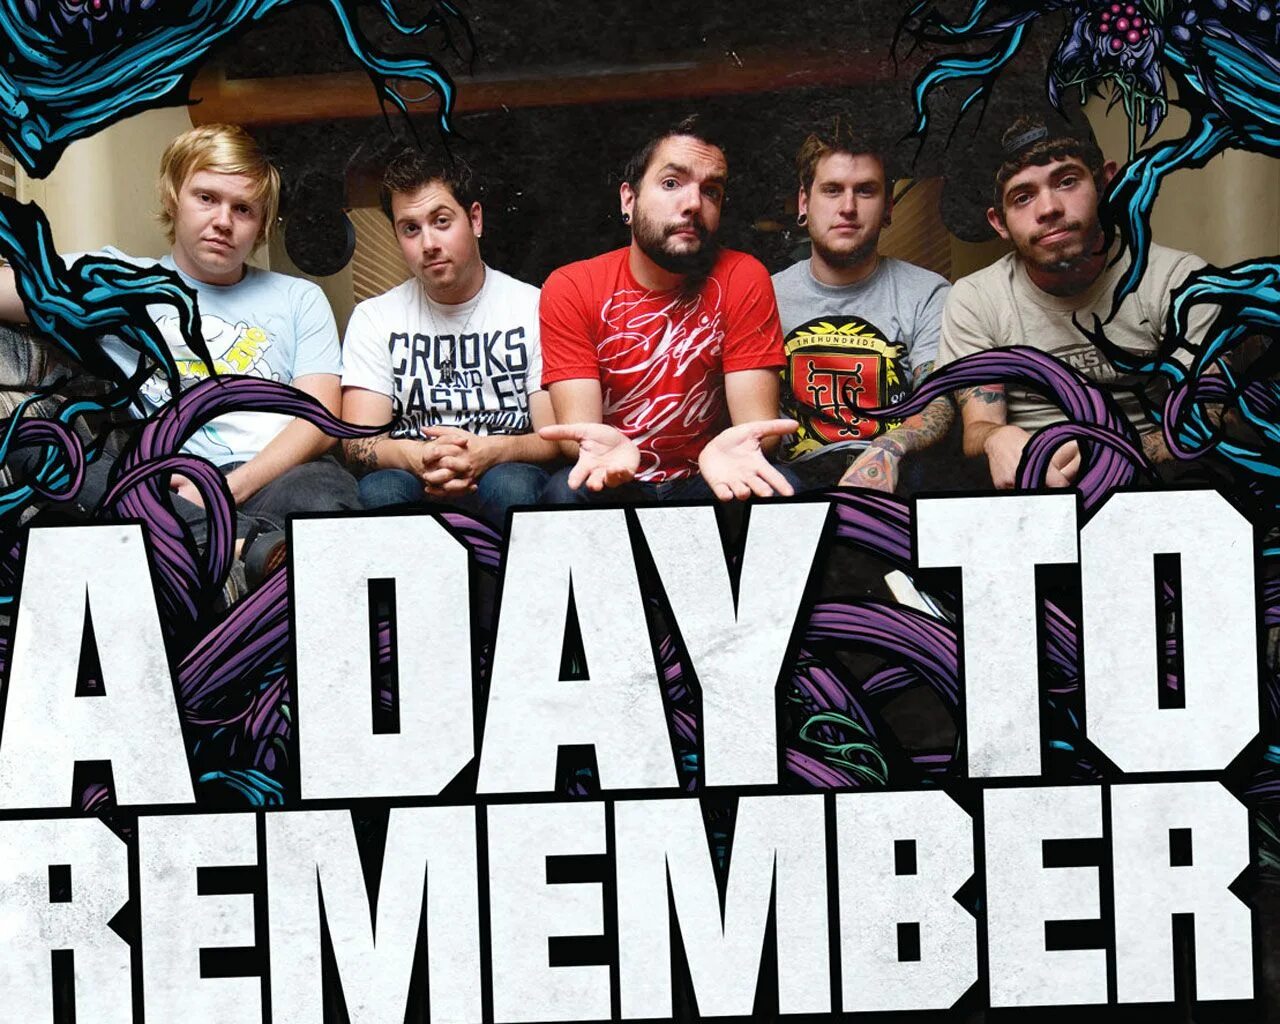 A Day to remember. Remember группа. A Day to remember 2021. Плакат группы a Day to remember.